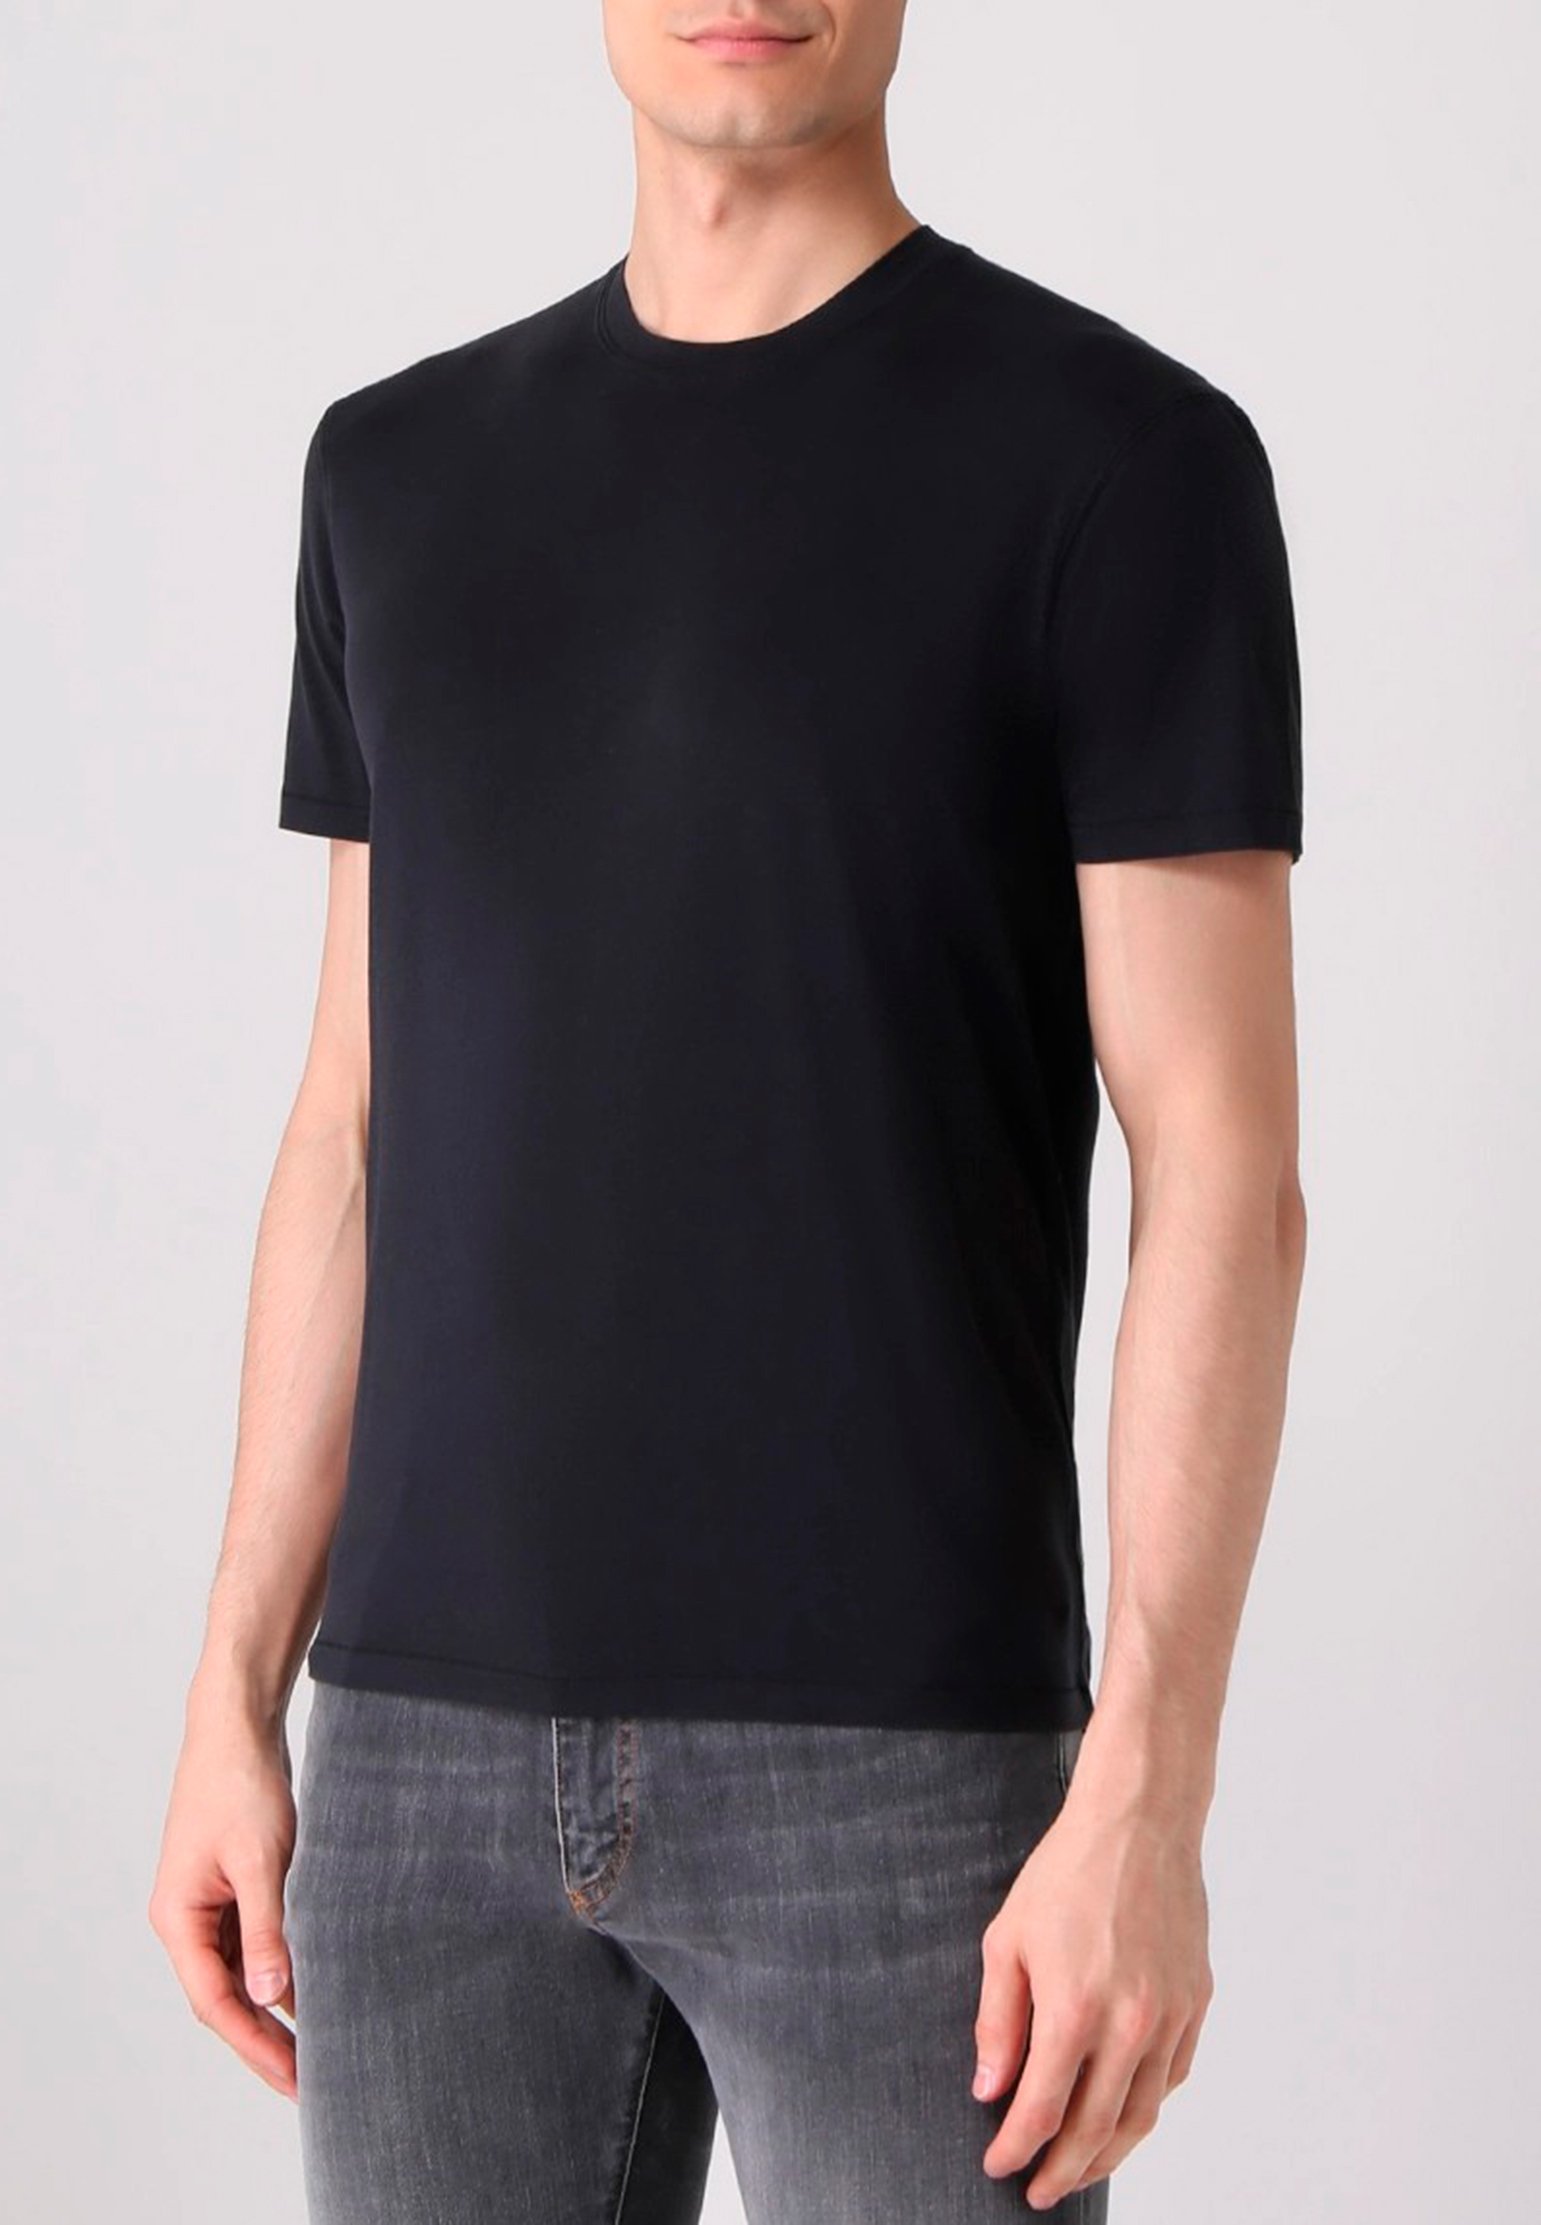 T-Shirt TOM FORD Color: black (Code: 180) in online store Allure